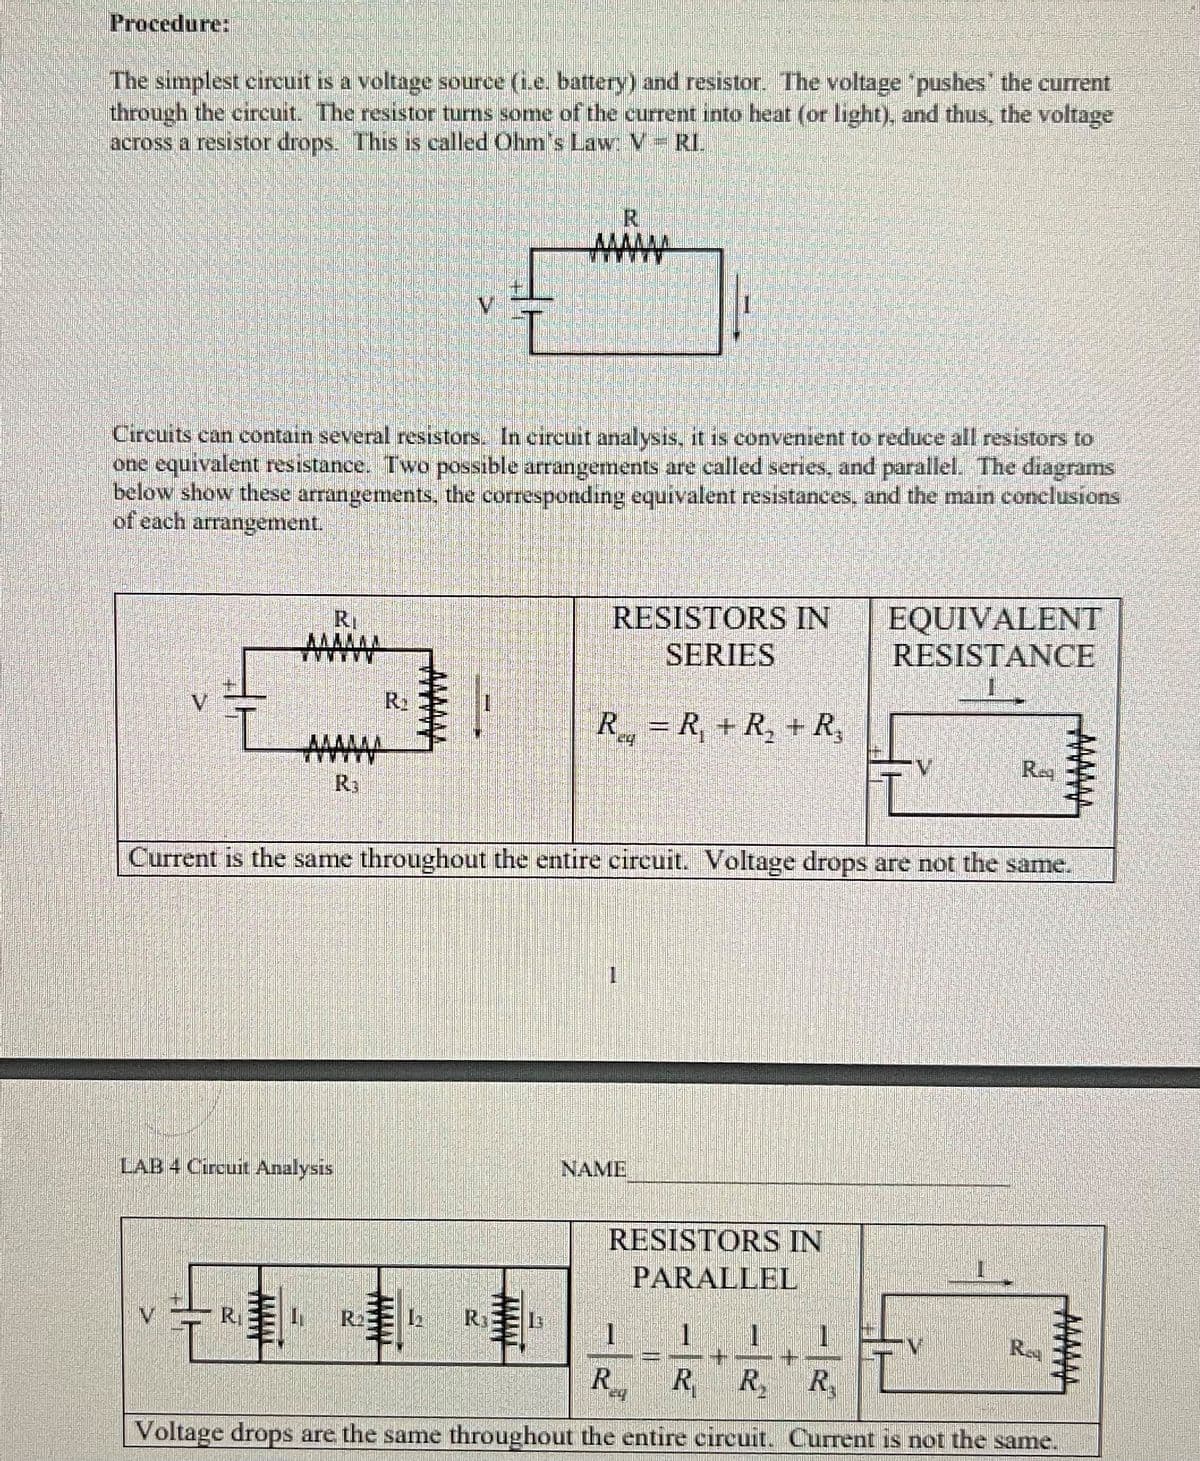 Procedure:
The simplest crcuit is a voltage source (i.e. battery) and resistor. The voltage "pushes' the current.
through the circuit. The resistor turns some of the current into heat (or light), and thus, the voltage
across a resistor drops. This is called Ohm's Law: V RI.
R
Aww
Circuits can contain several resistors. In circuit analysis, it is convenient to reduce all resistors to
one equivalent resistance. Two possible arrangements are called series, and parallel. The diagrams
below show these arrangements, the corresponding equivalent resistances, and the main conclusions
of each arrangement.
EQUIVALENT
RESISTANCE
RI
RESISTORS IN
SERIES
V.
R = R, + R, + R,
AWw
Reg
R3
Current is the same throughout the entire circuit. Voltage drops are not the same.
LAB 4 Circuit Analysis
NAME
RESISTORS IN
PARALLEL
V.
R
R2
1.
Rey
R
R R R,
Voltage drops are the same throughout the entire circuit. Current is not the same.
